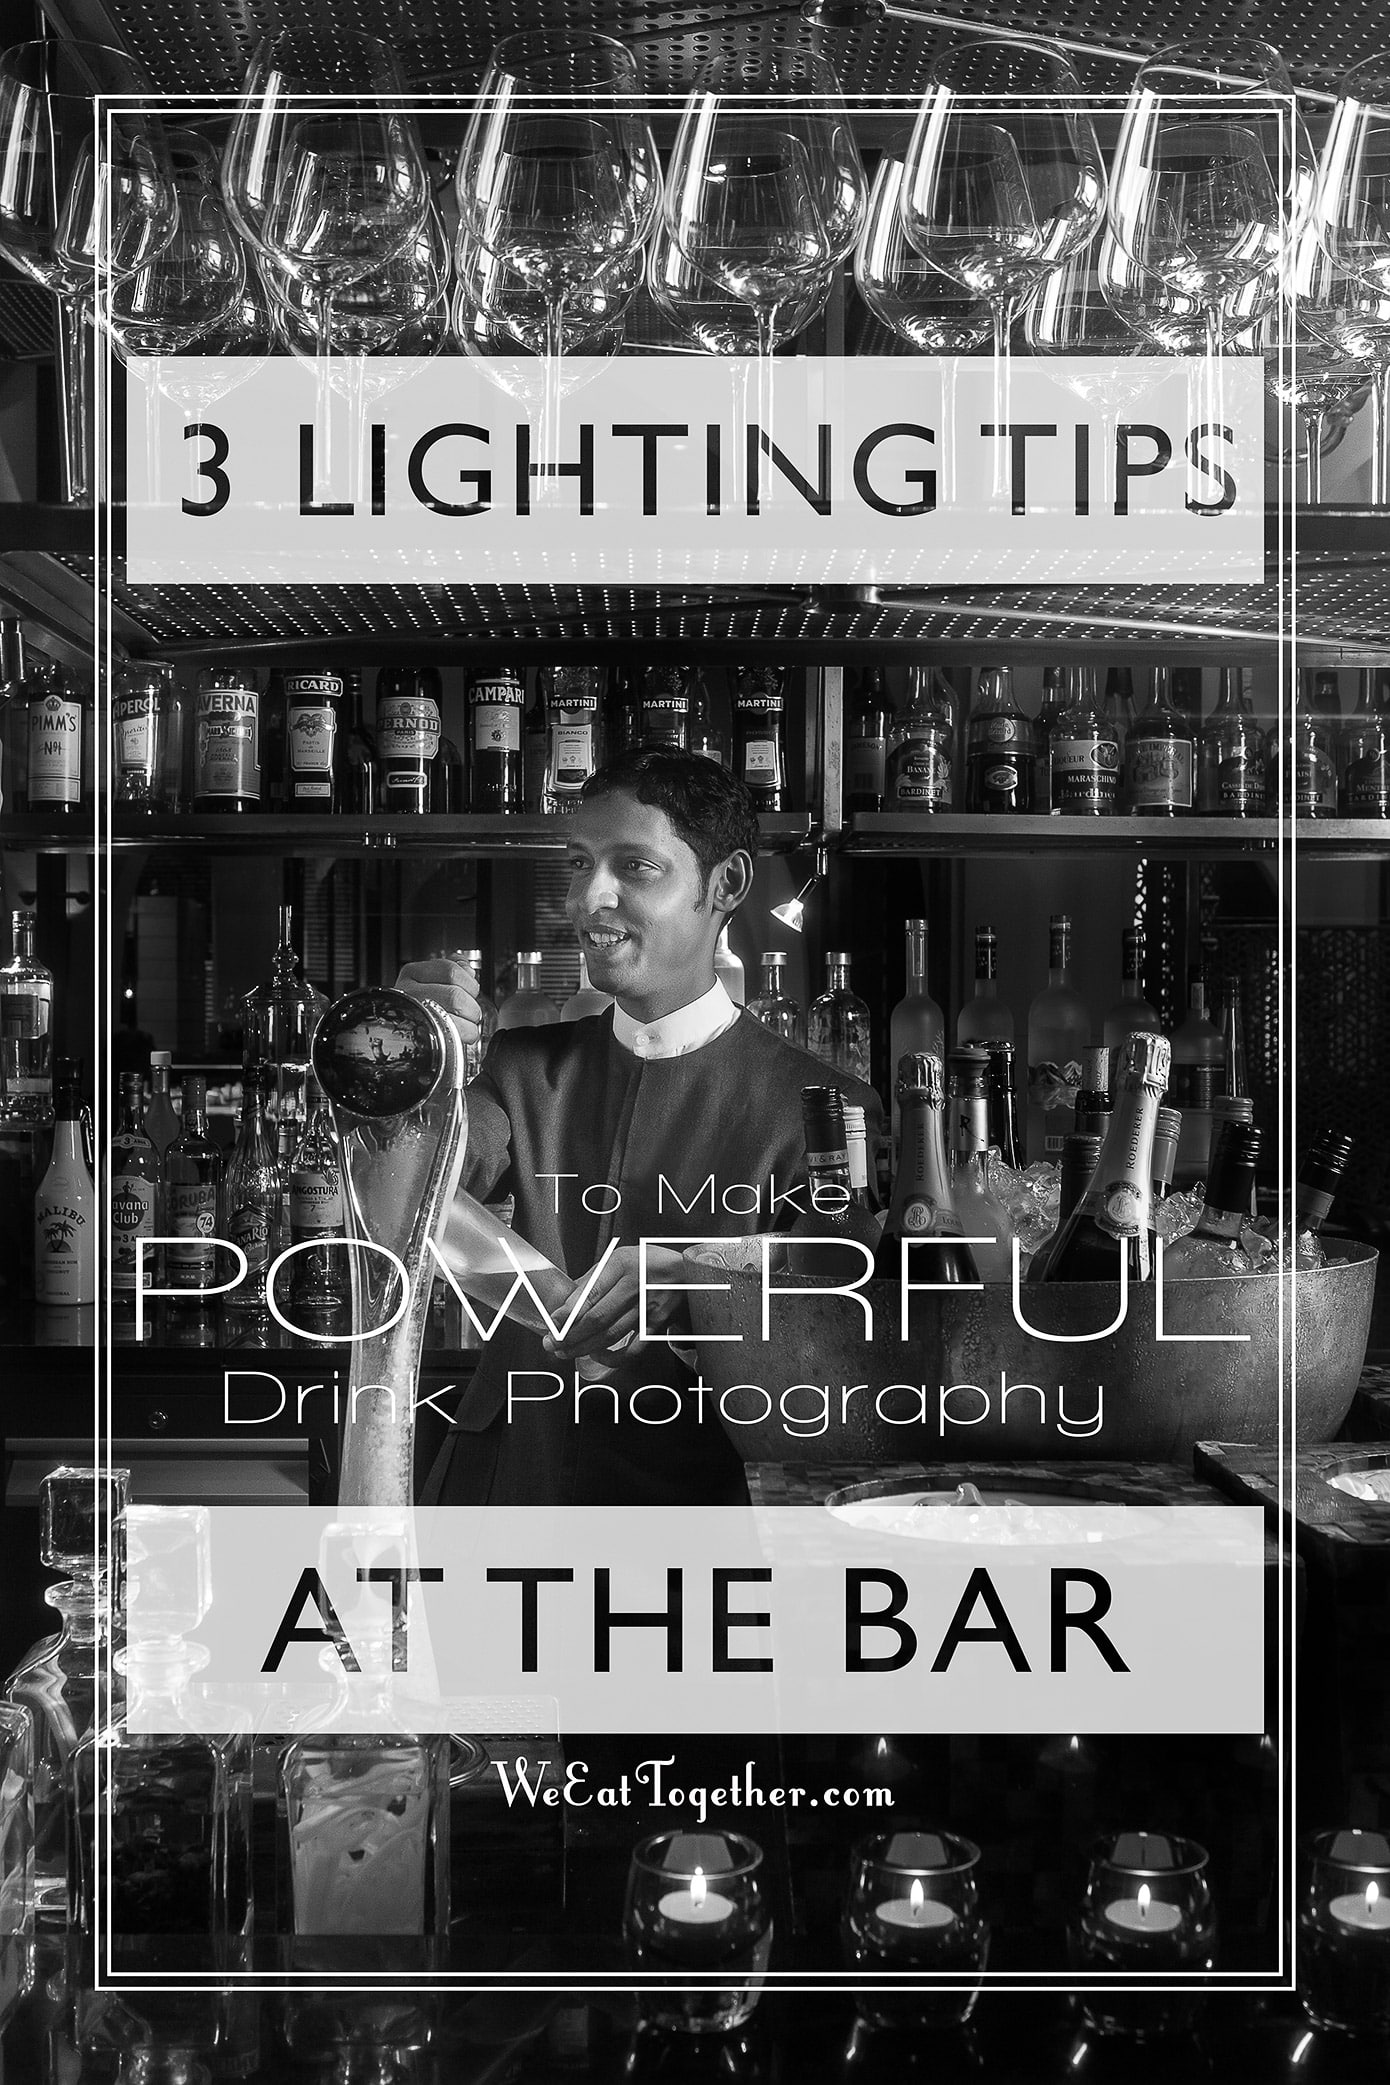 3 Lighting Tips To Make Powerful Drink Photography At The Bar - WeEatTogether.com